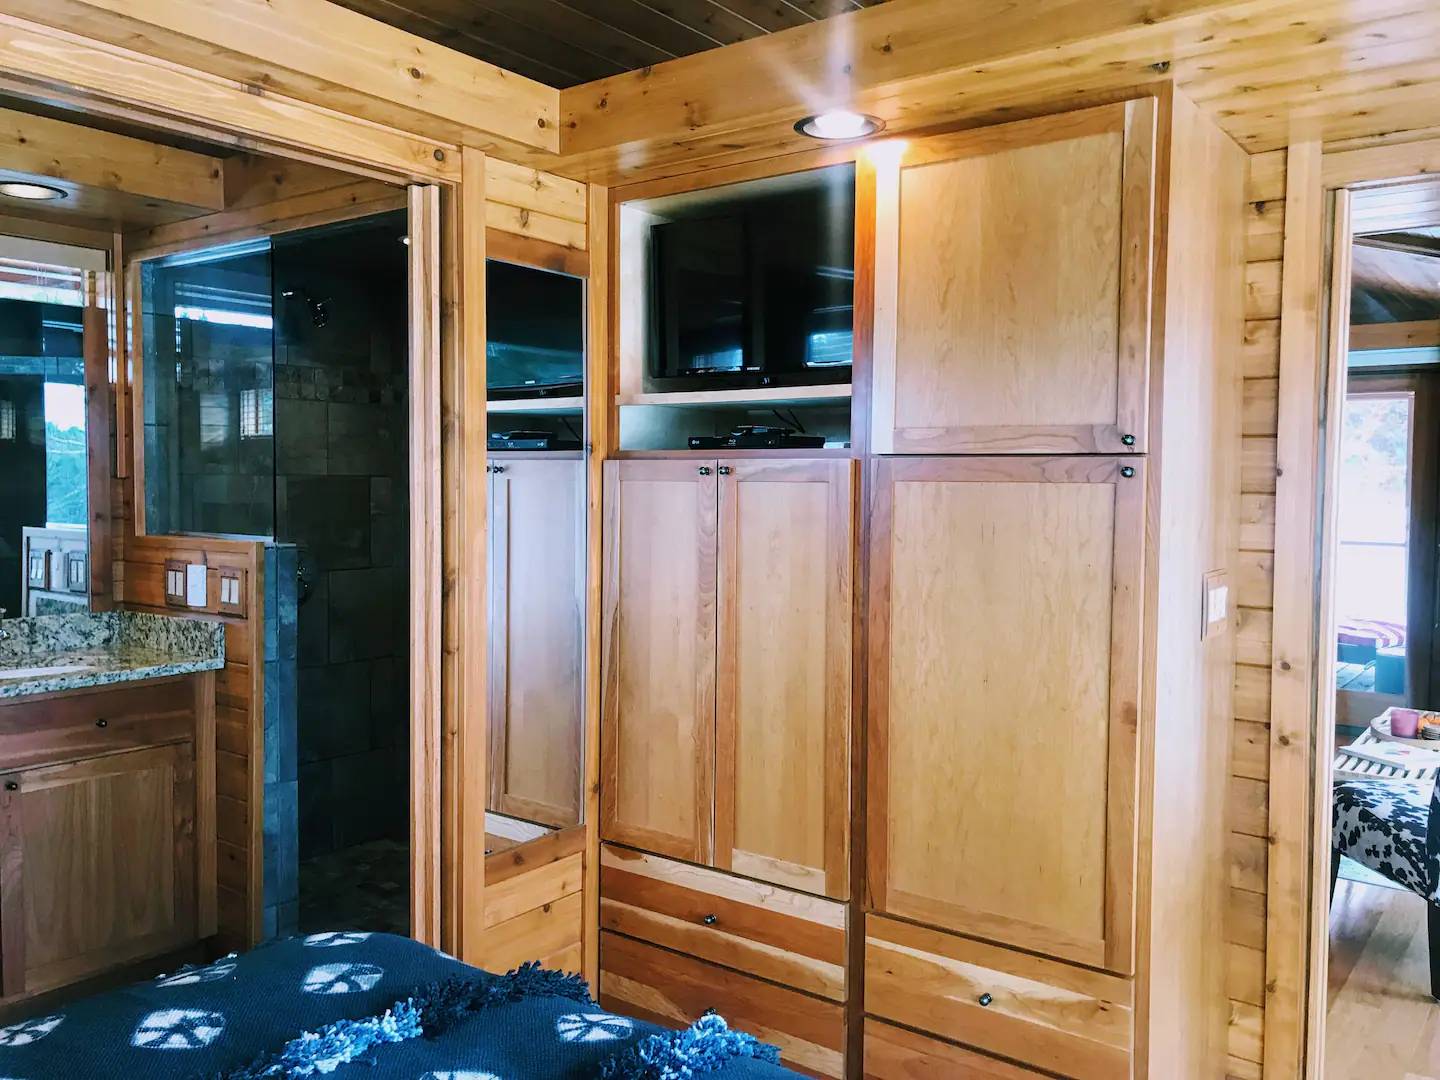 A big screen TV and a full length mirror are also included in the spacious cherry cabinets. Two huge, interconnecting pocket doors divide the bedroom from the bathroom.